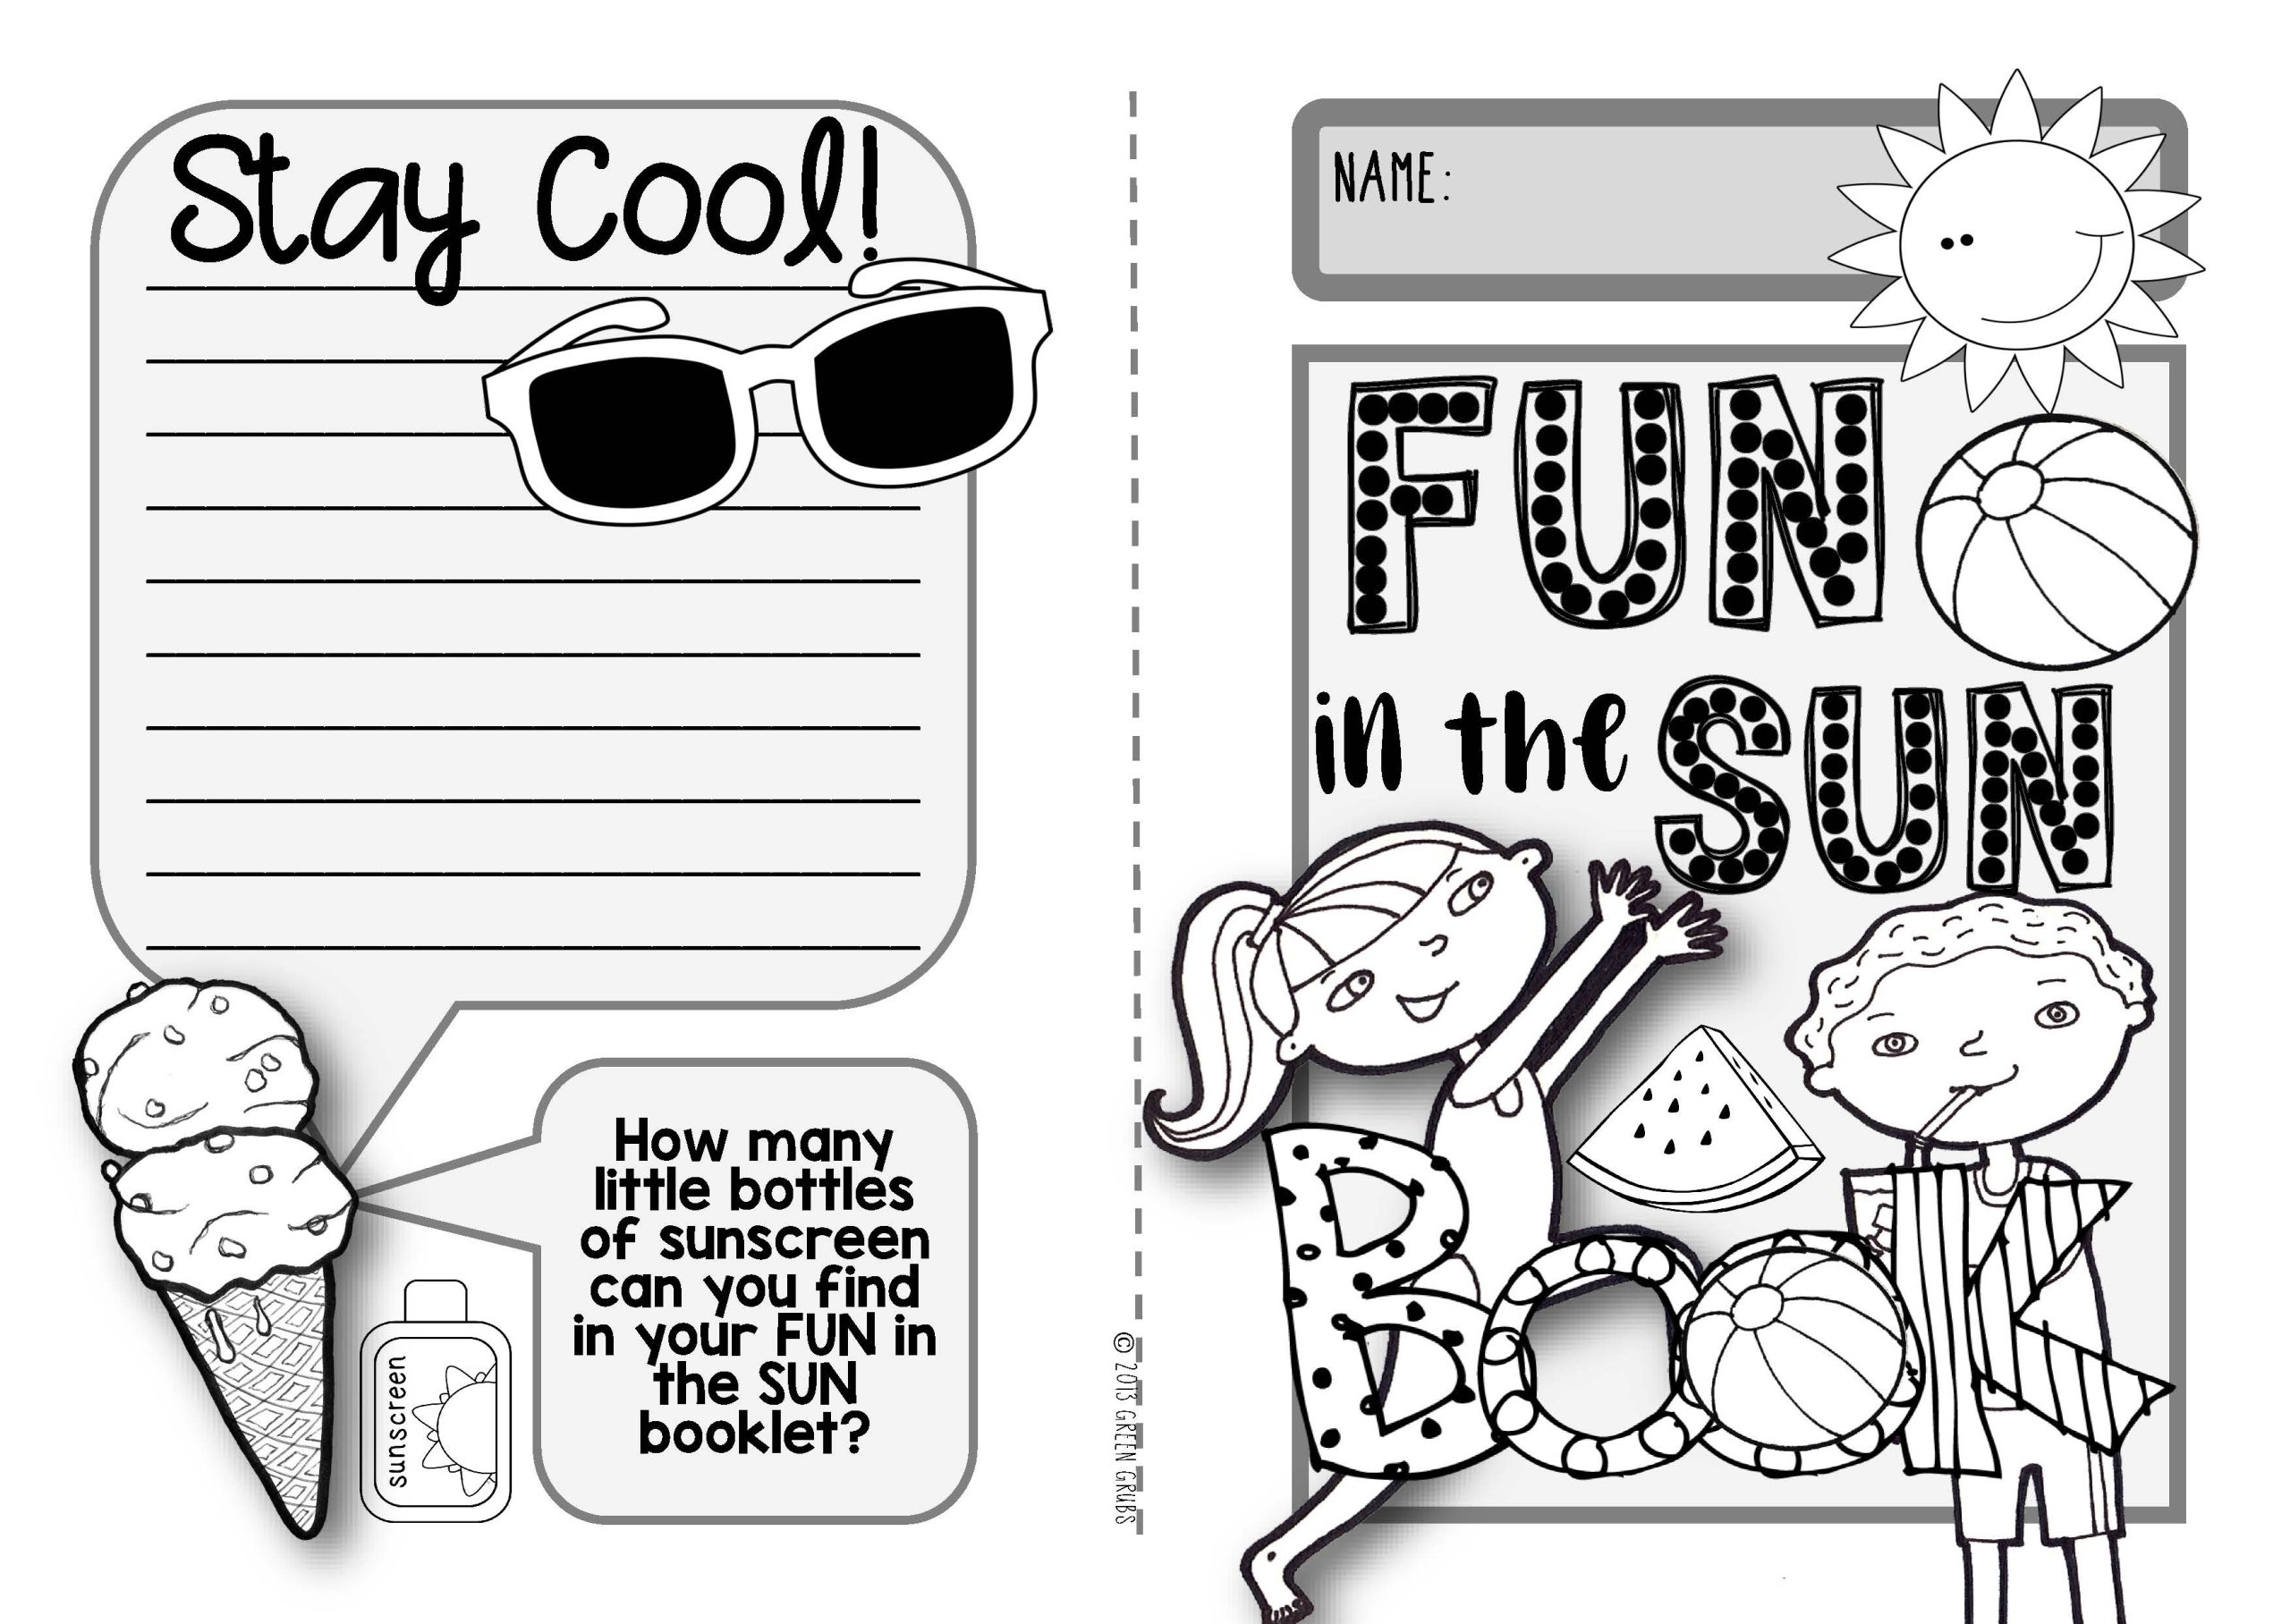 Sun safety â fun and safe in the sun booklet